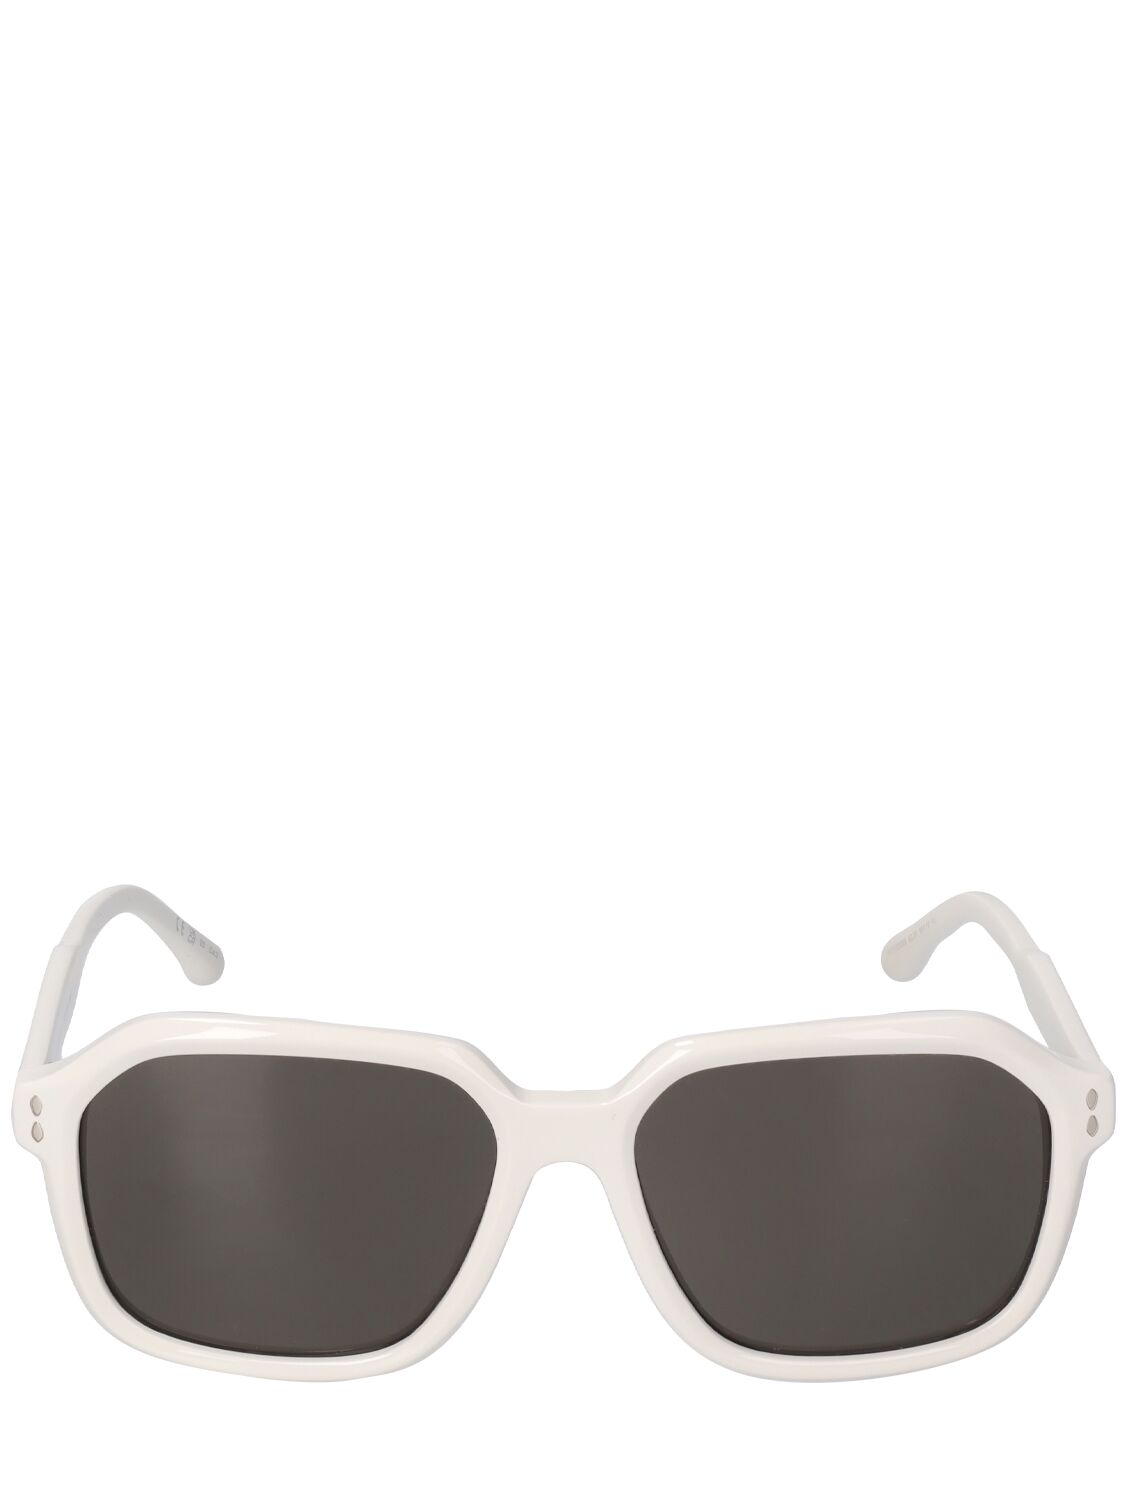 Isabel Marant The In Love Classic Acetate Sunglasses In White,grey